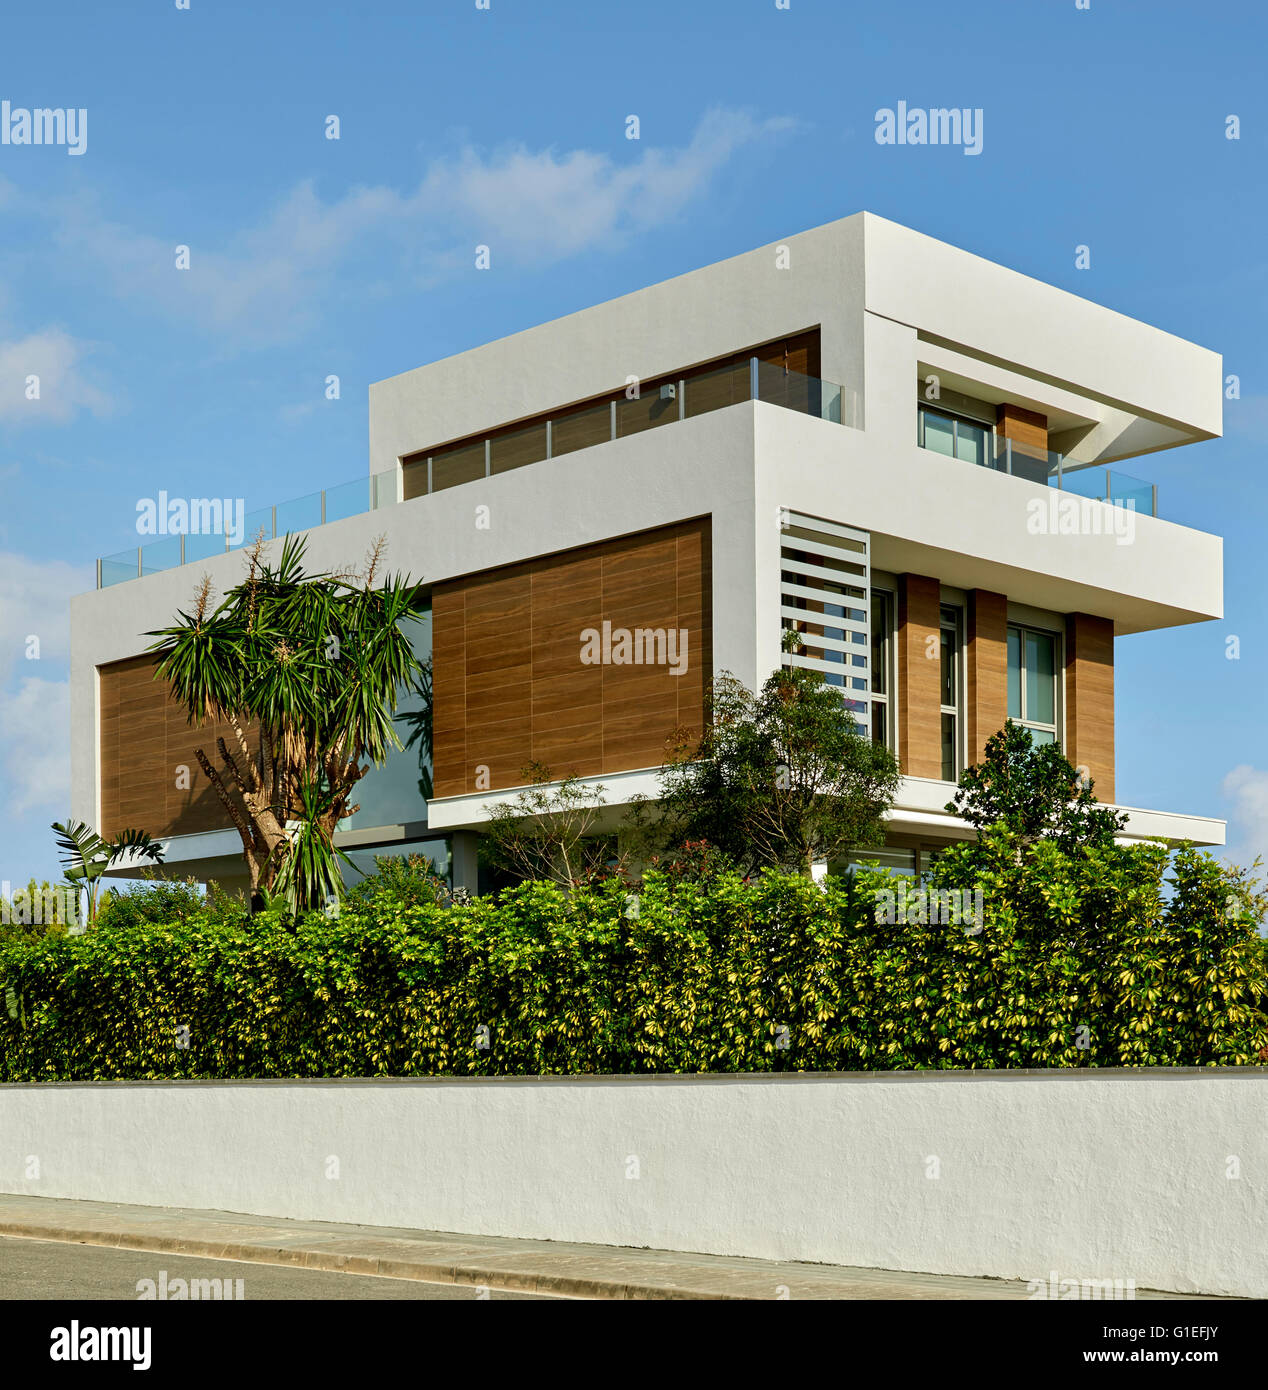 White House, L'Ametlla. Exterior view of the modern house. Partially hidden by shrubs and bushes. Stock Photo